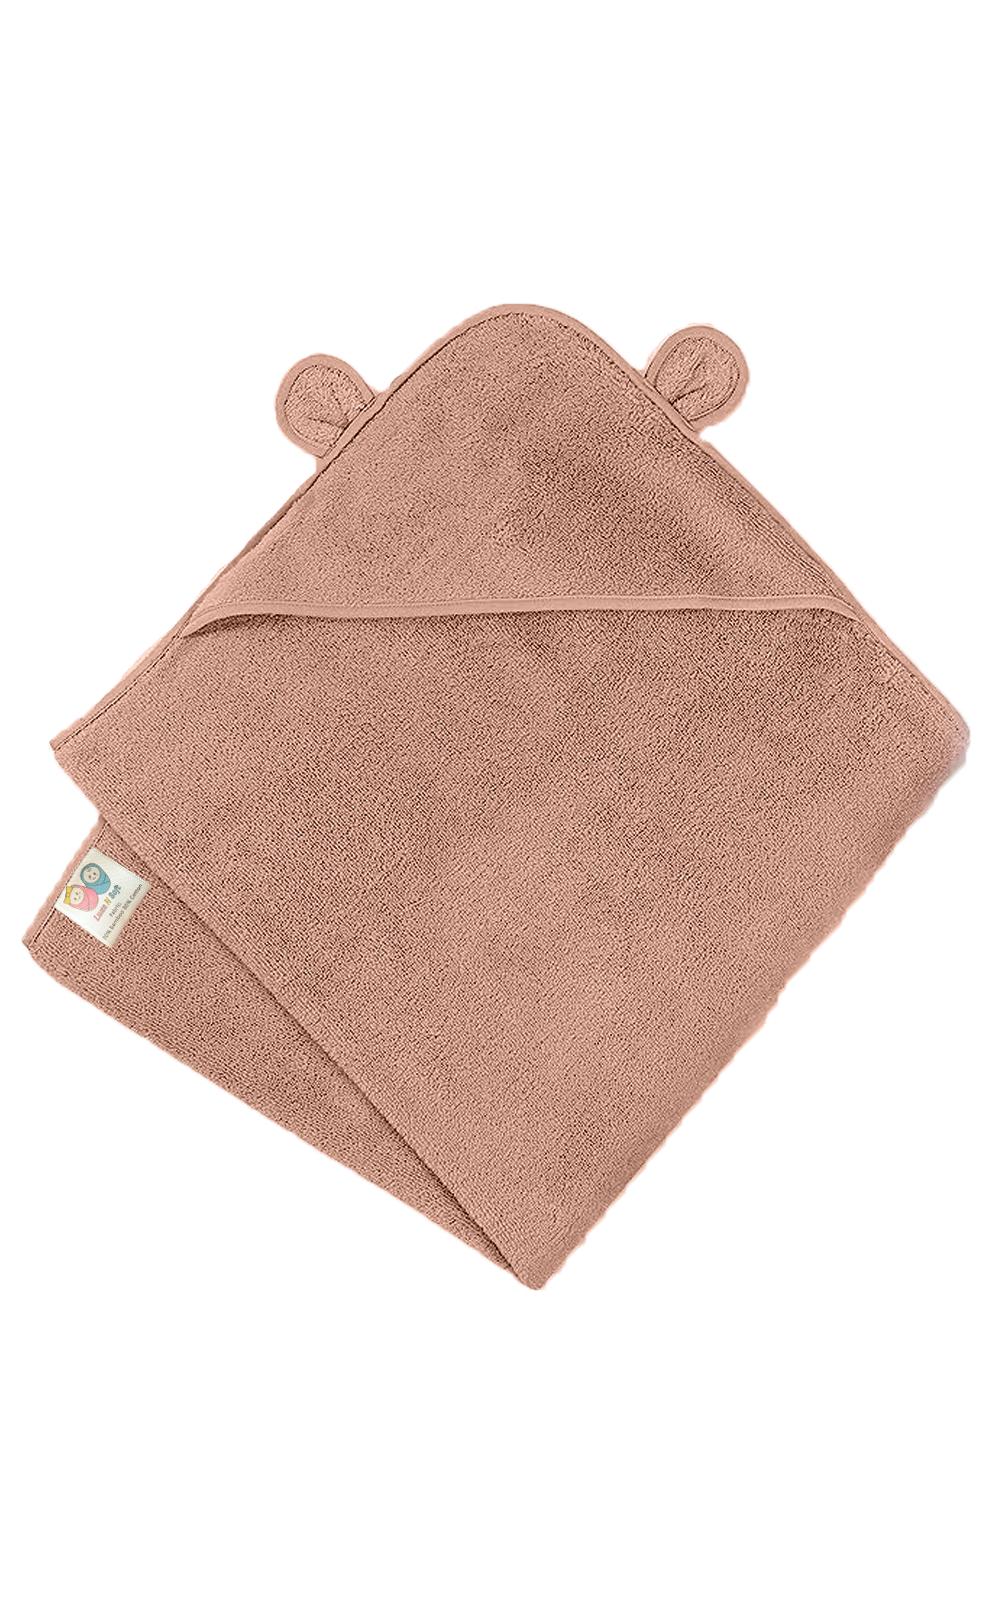 Luxe N Soft Premium Baby Hooded Towel ,Super Soft and Absorbent , Cute Animal Design, Ideal for Newborns and Toddlers, Perfect Baby Shower Gift